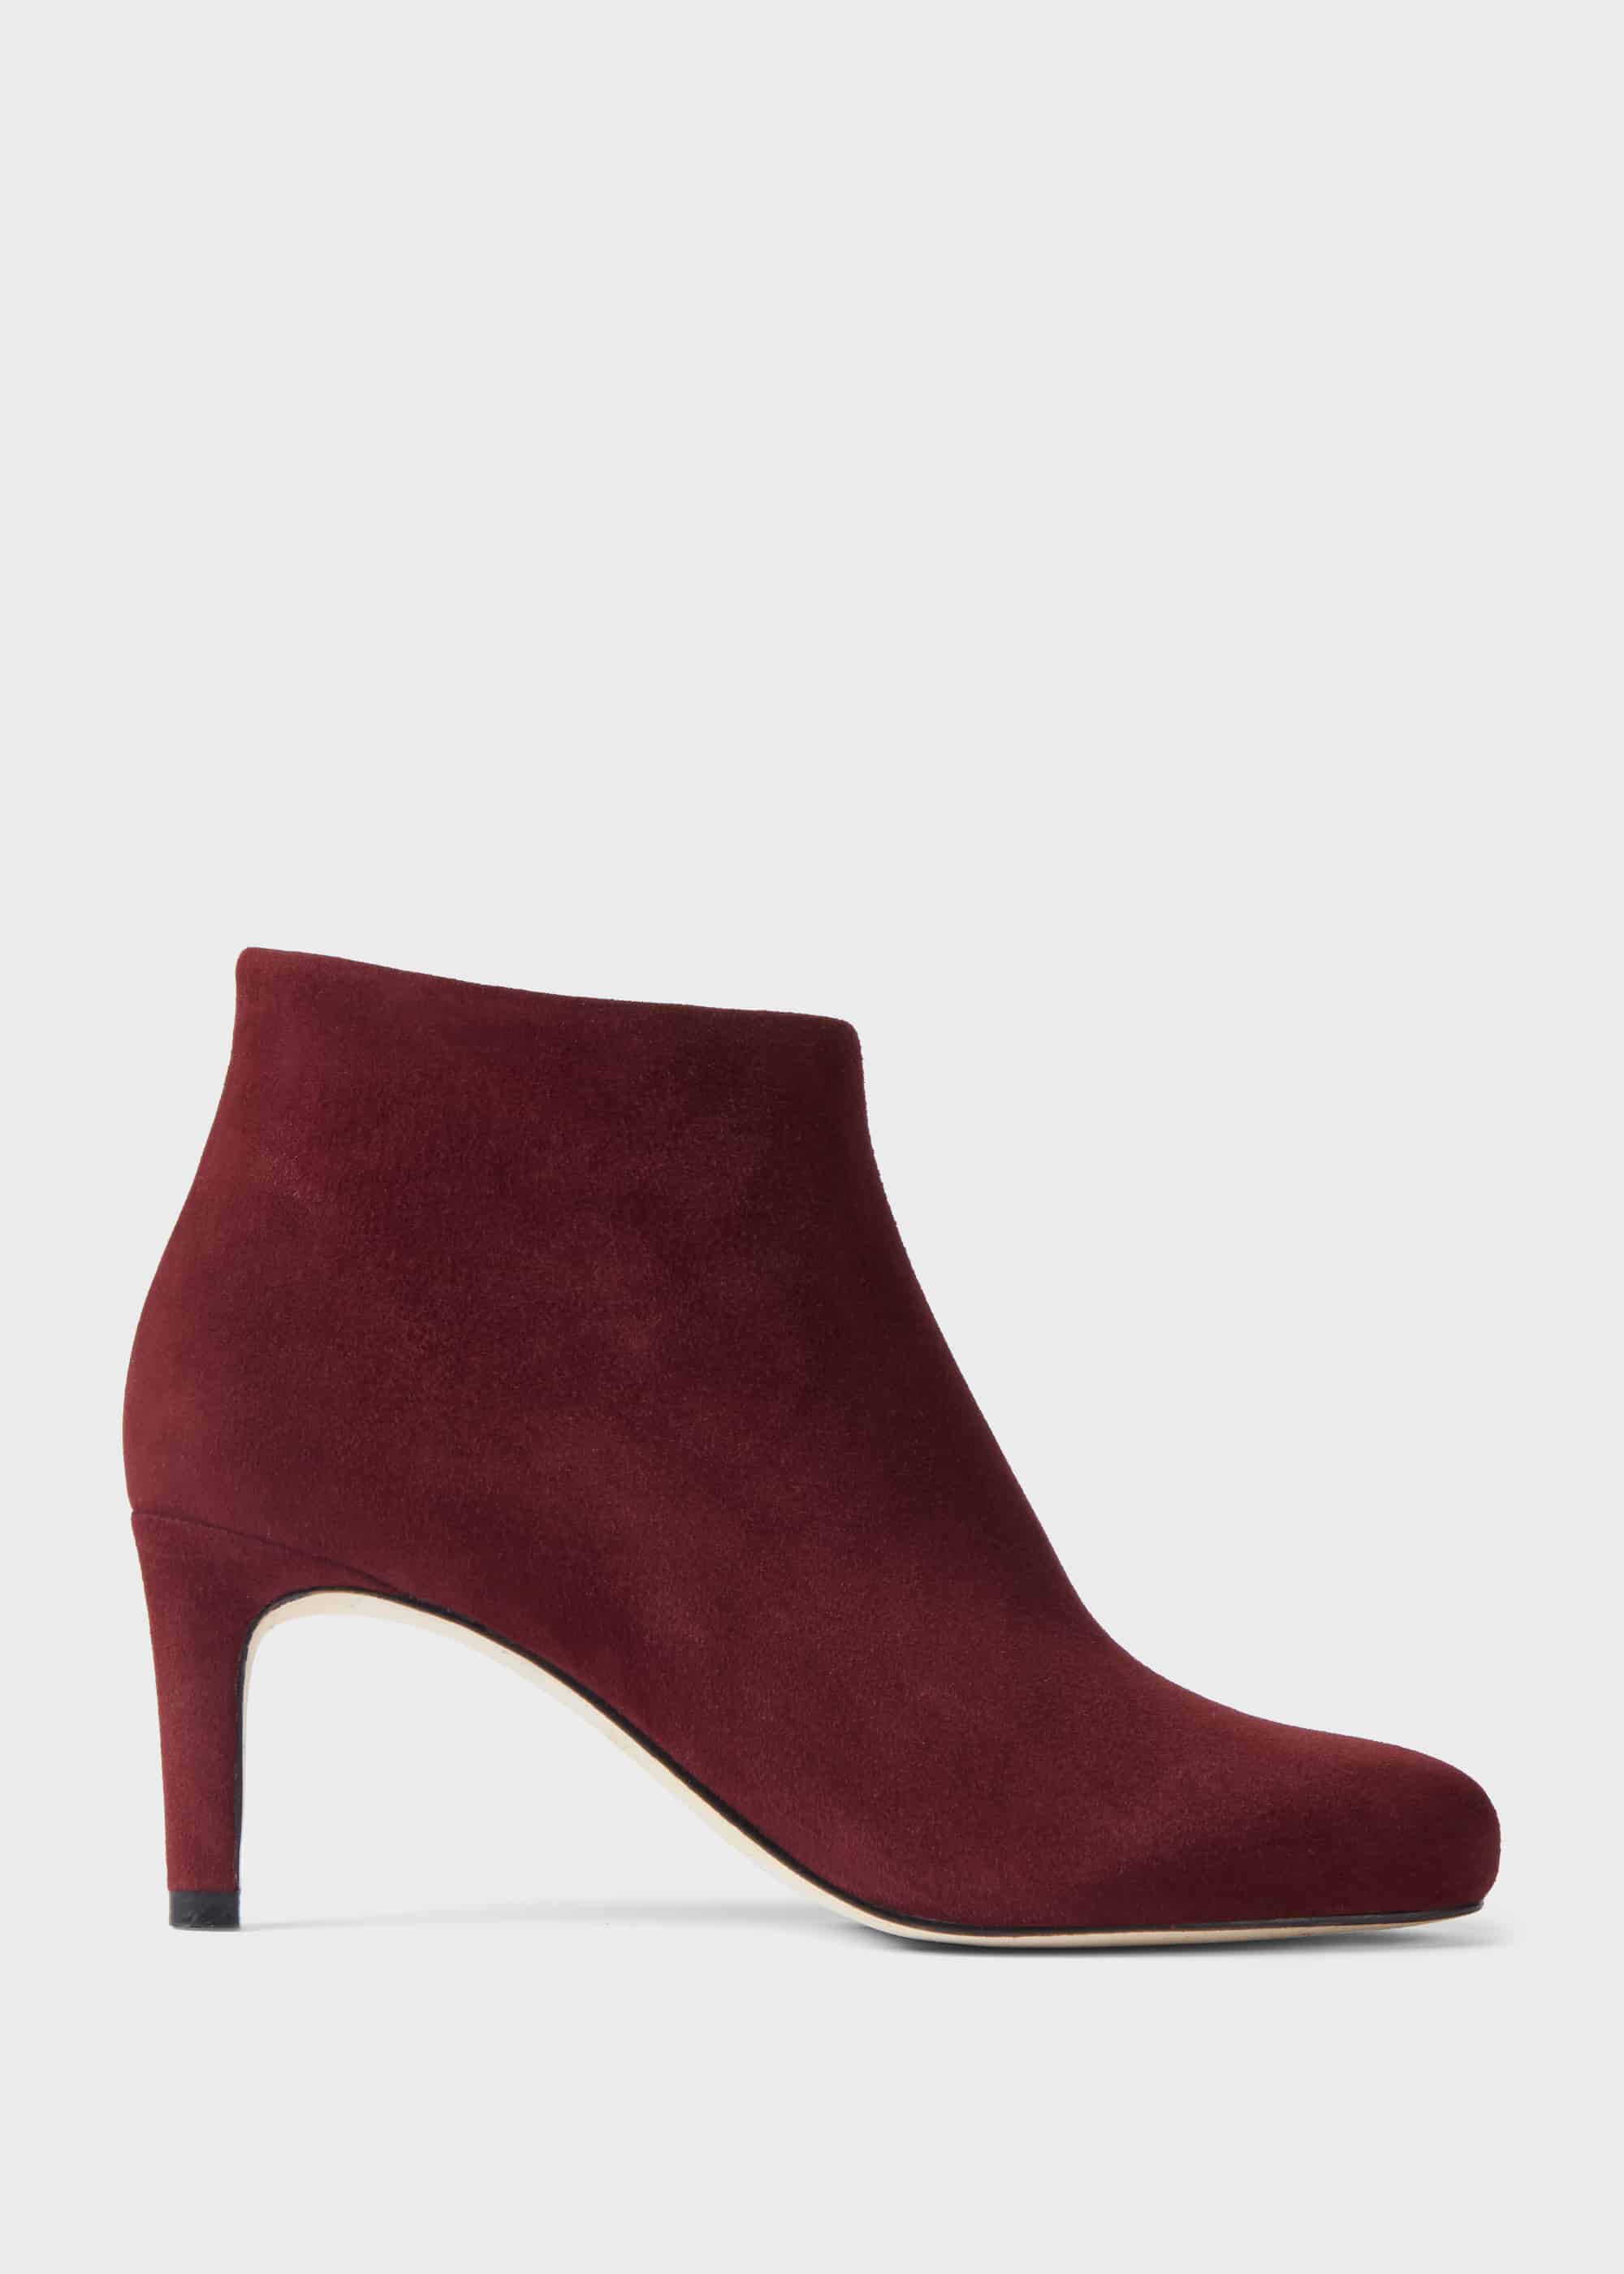 hobbs suede ankle boots